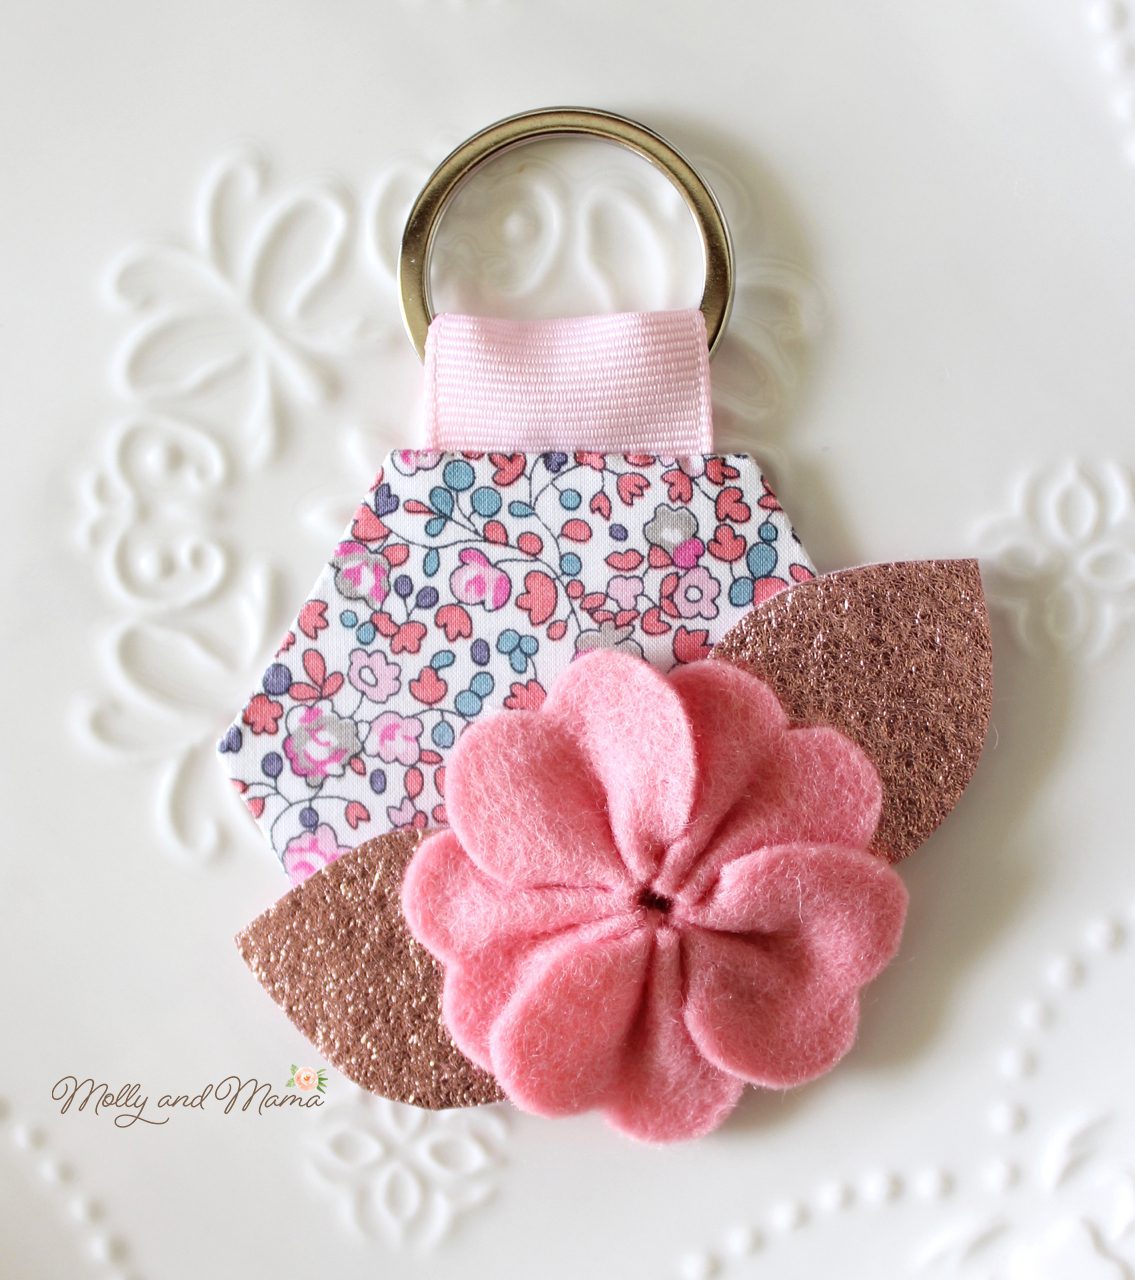 How To Make Felt Flowers - Molly and Mama